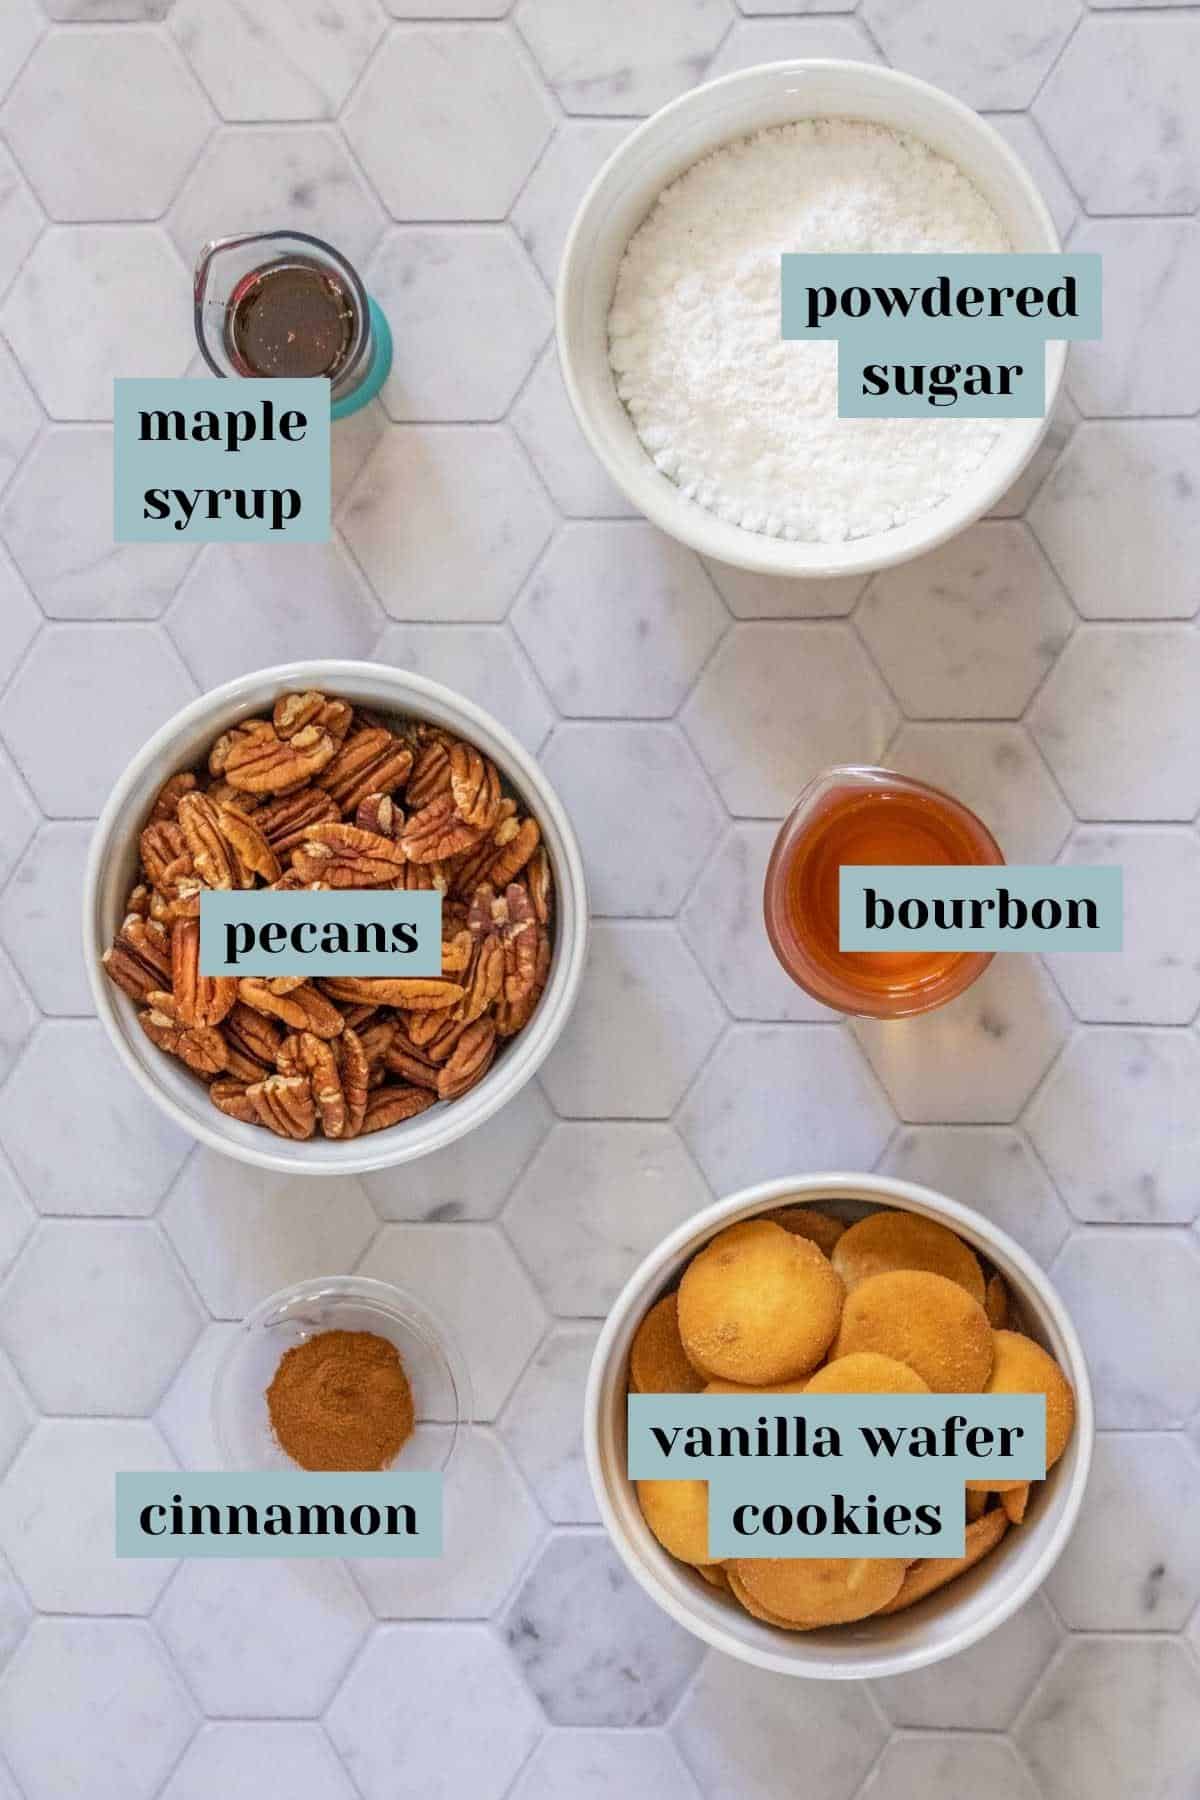 Ingredients for bourbon balls on a tile surface with labels.